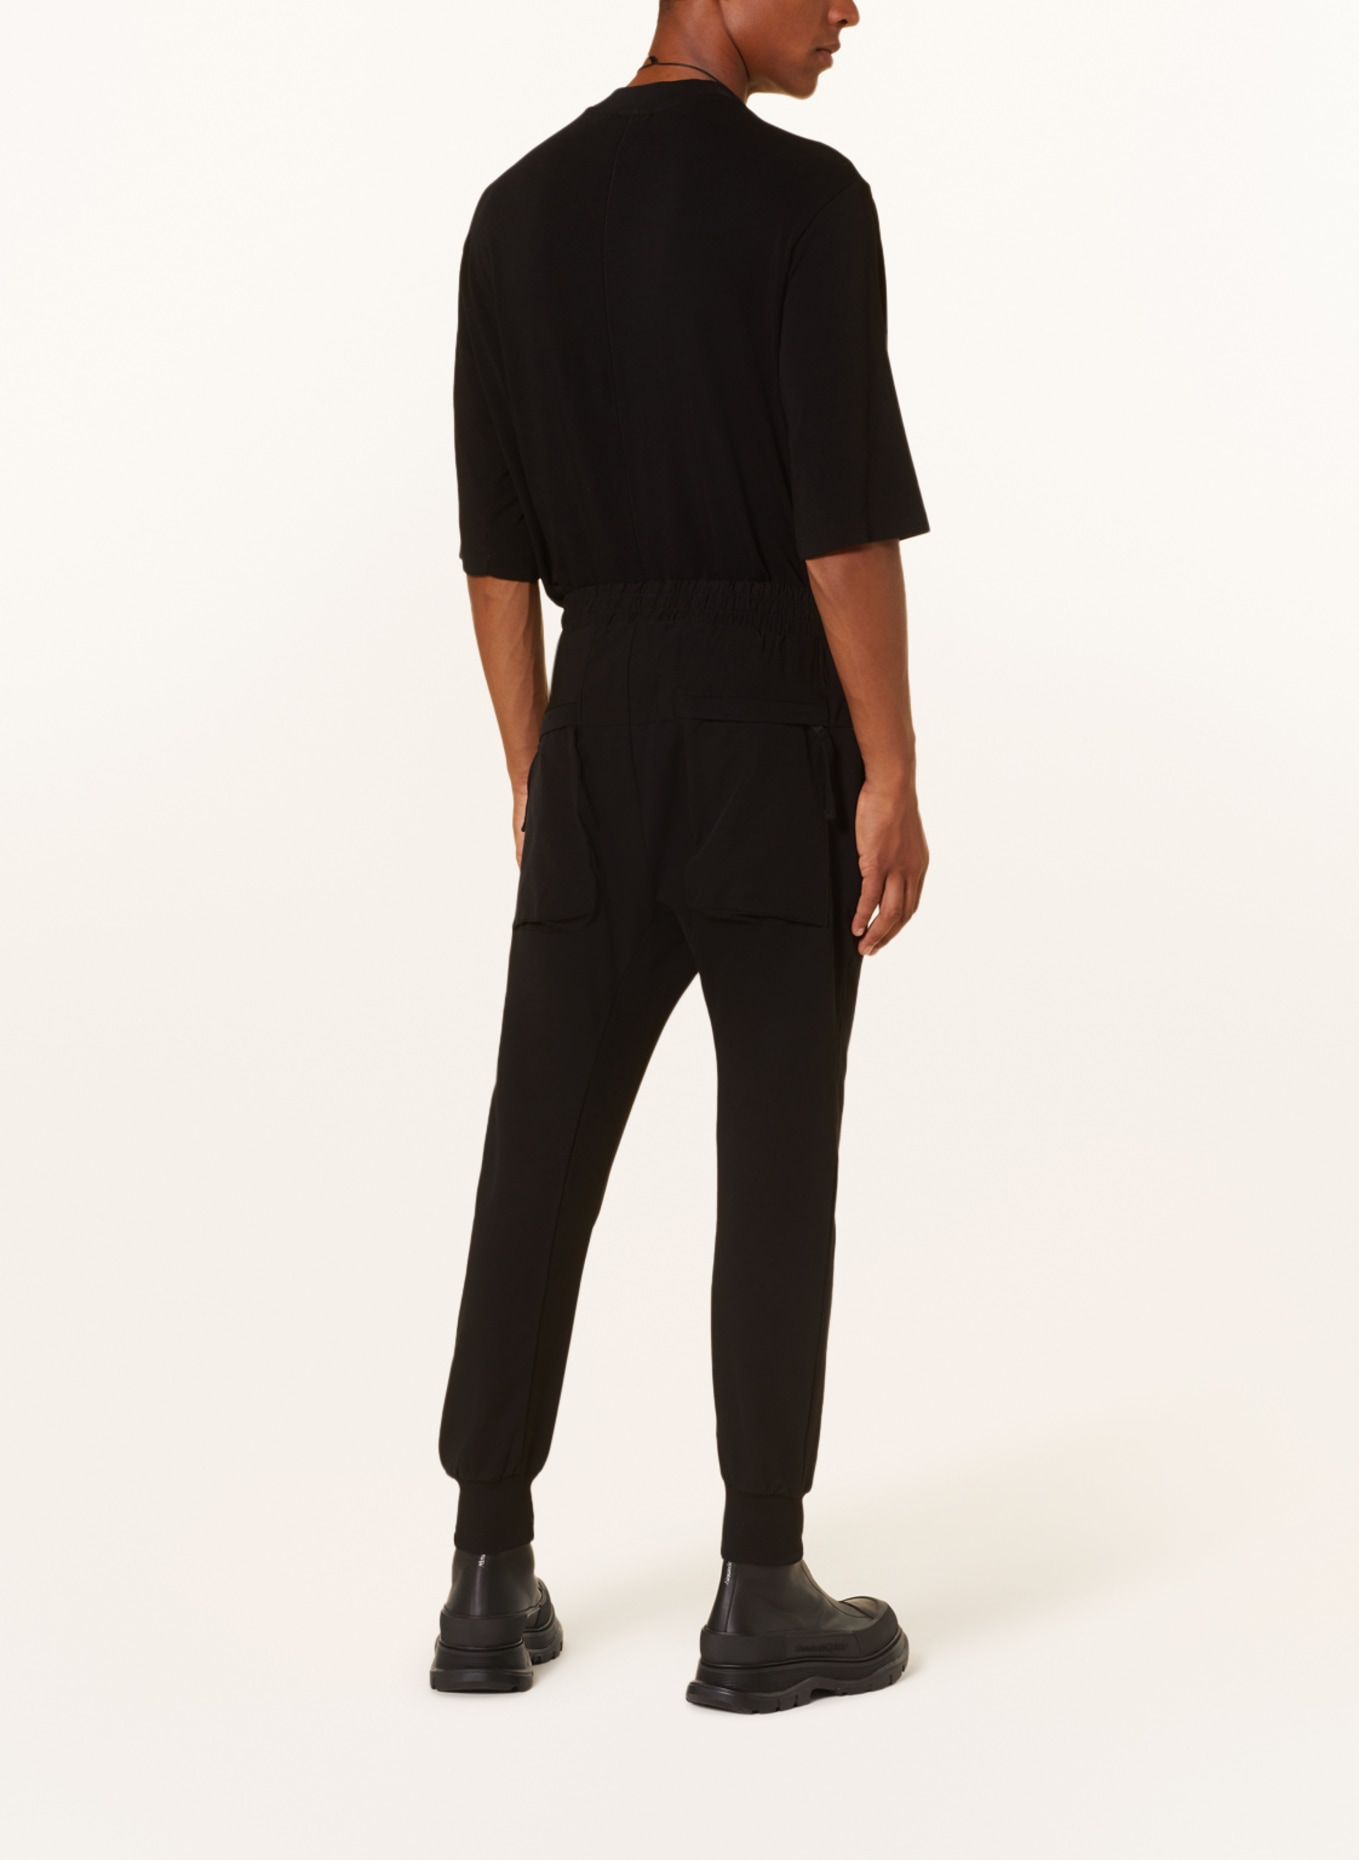 thom/krom Pants in jogger style extra slim fit, Color: BLACK (Image 3)